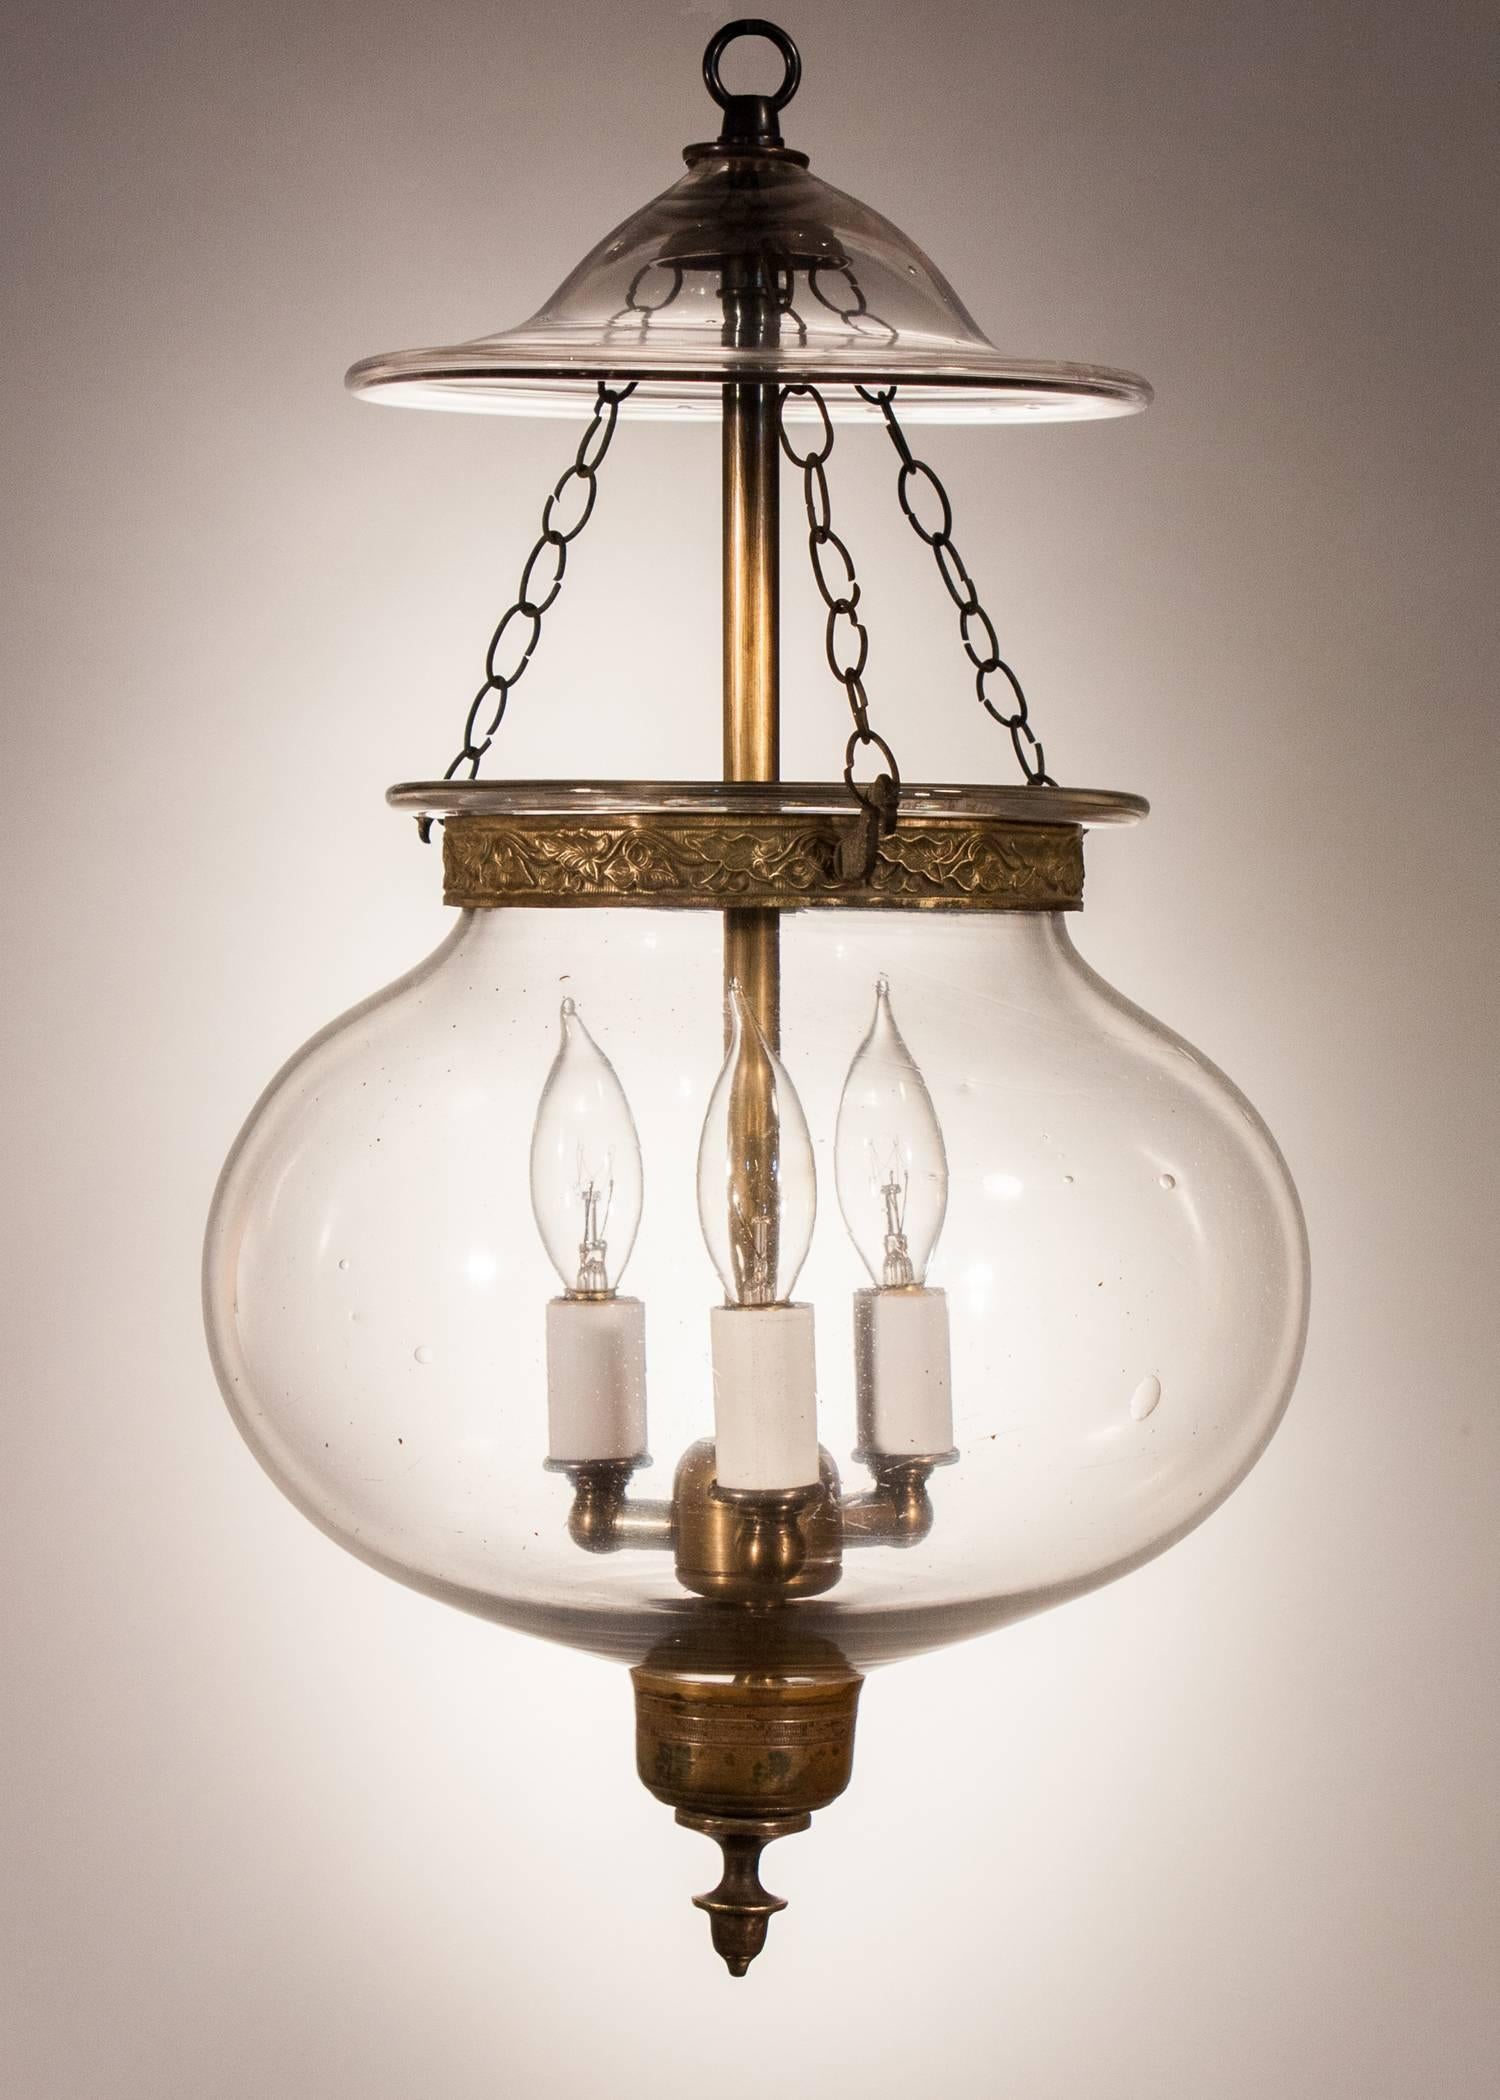 Charming clear glass hall lantern from England, circa 1860, with its original embossed brass band and candleholder finial base. The globe is quite shapely and has desirable swirls and air bubbles in the handblown glass. Several surface scratches are